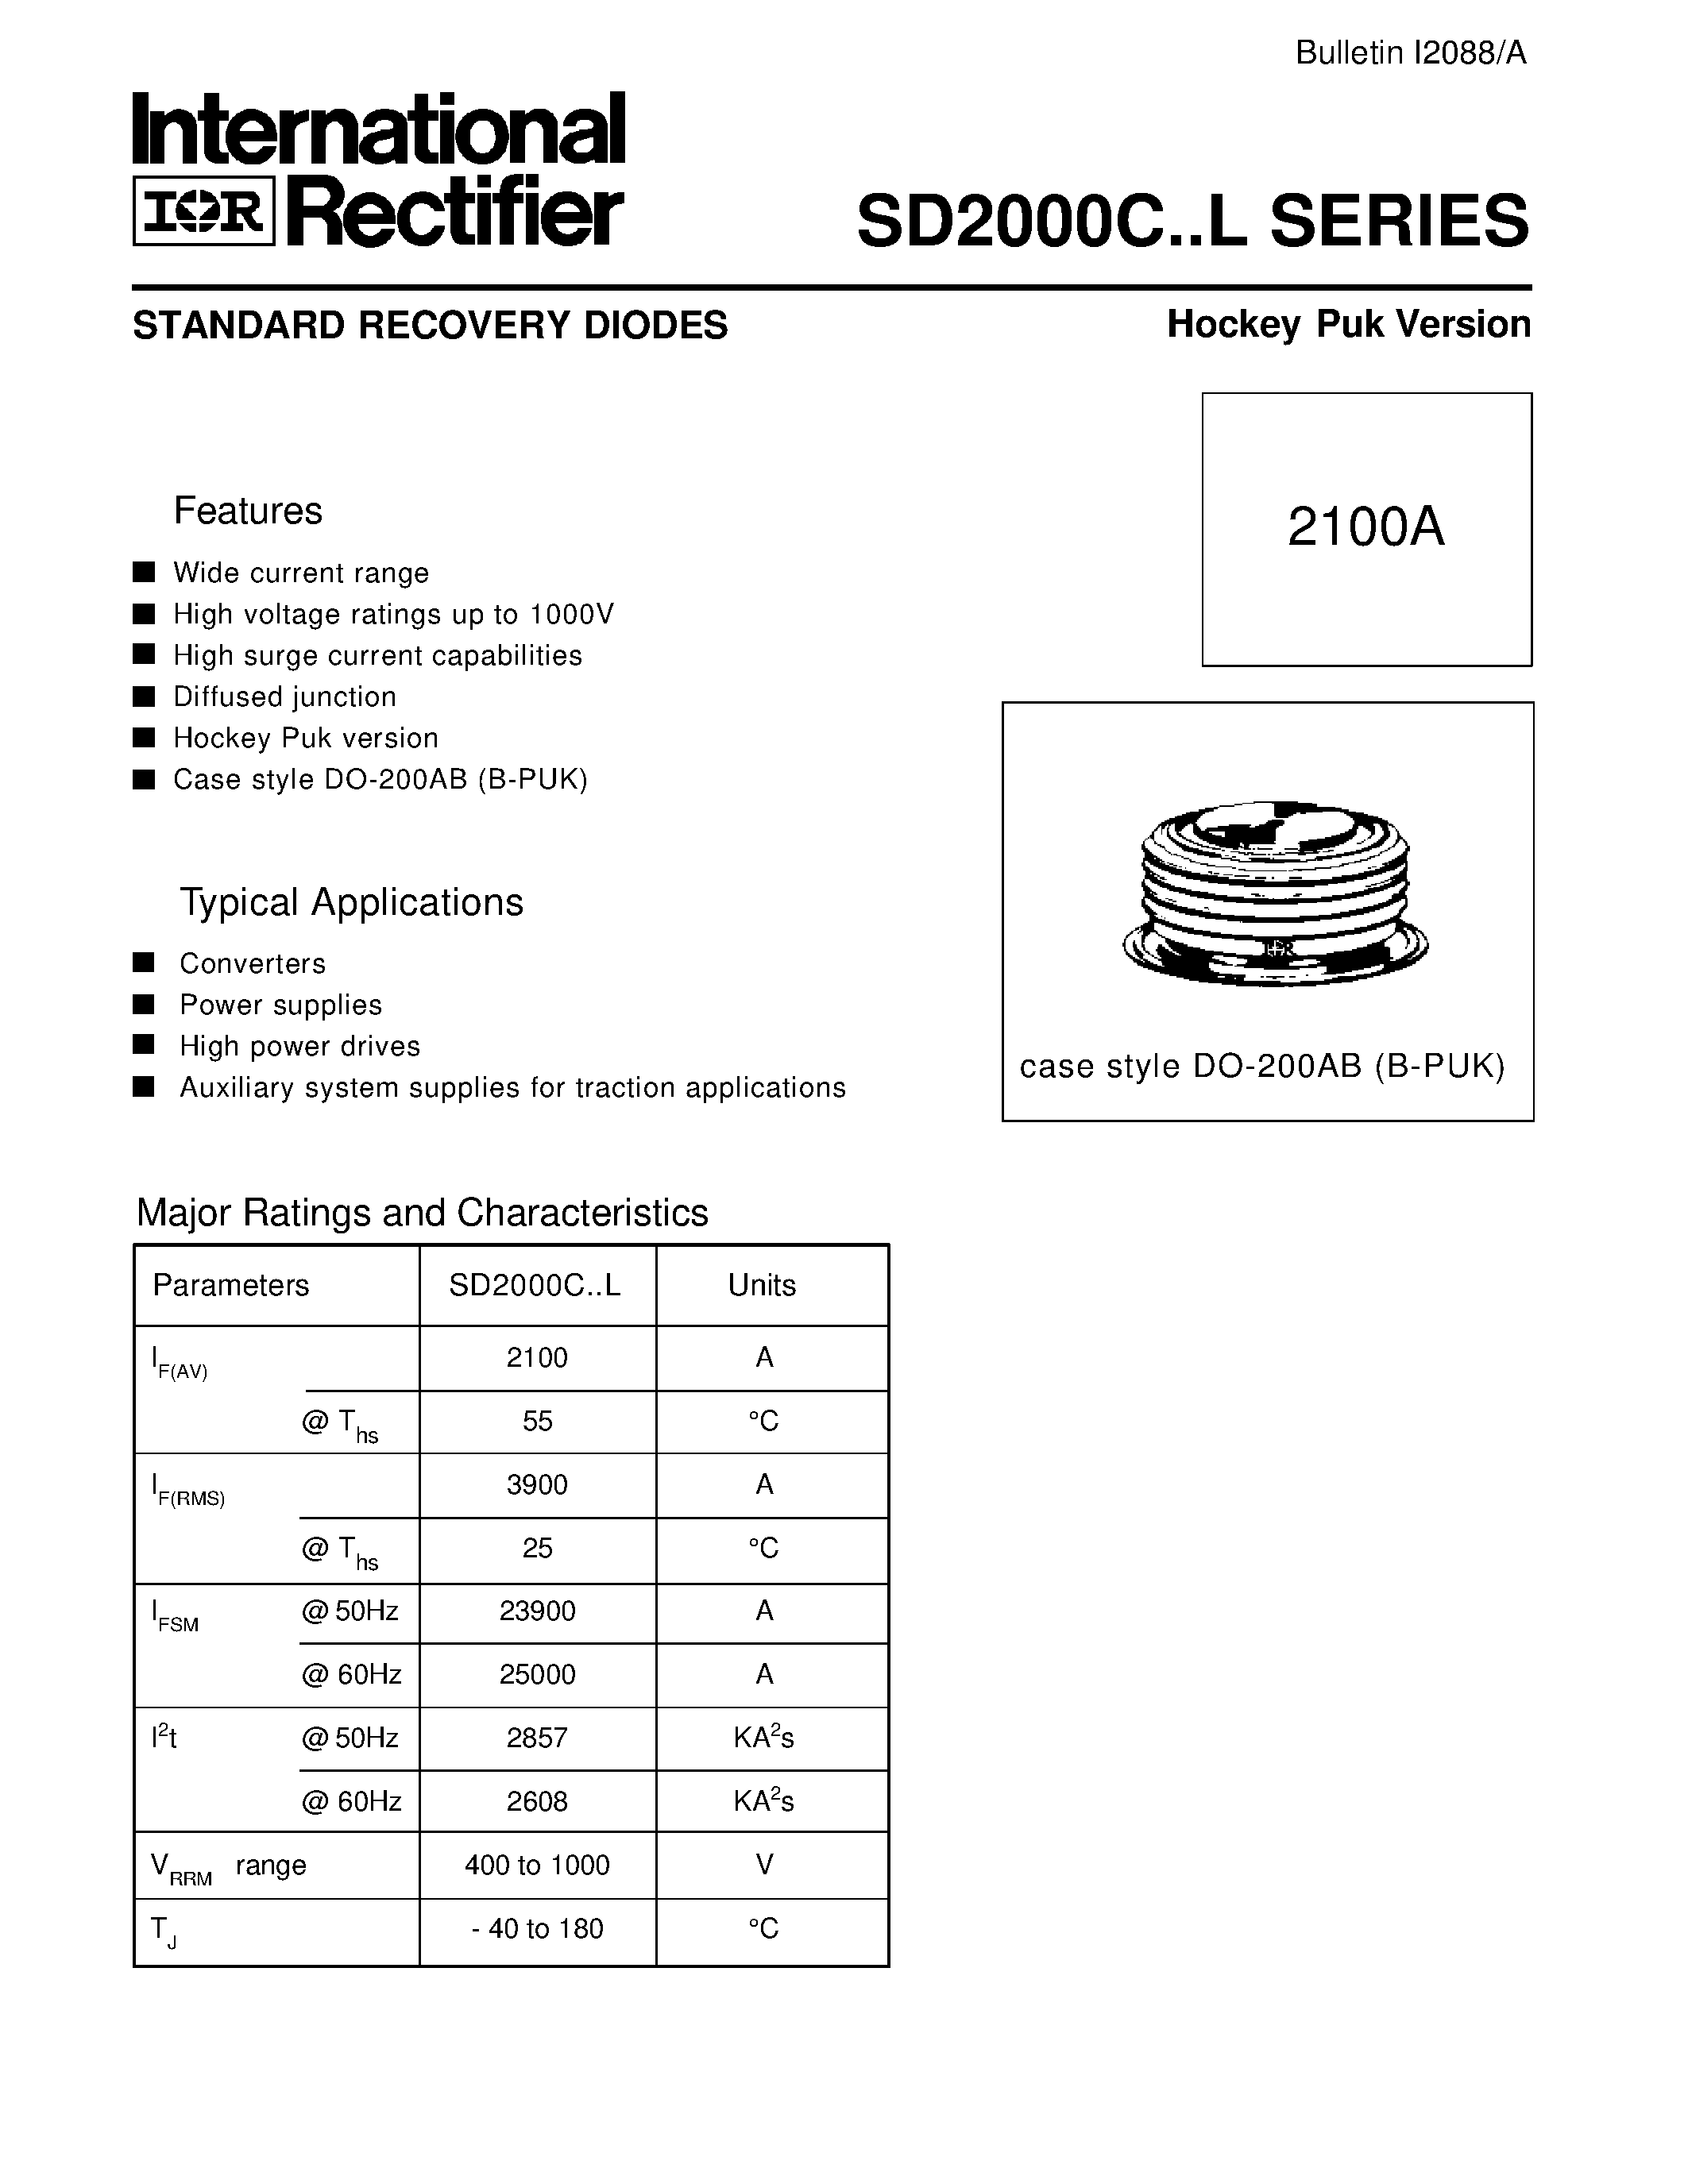 Datasheet SD2000C - STANDARD RECOVERY DIODES Hockey Puk Version page 1